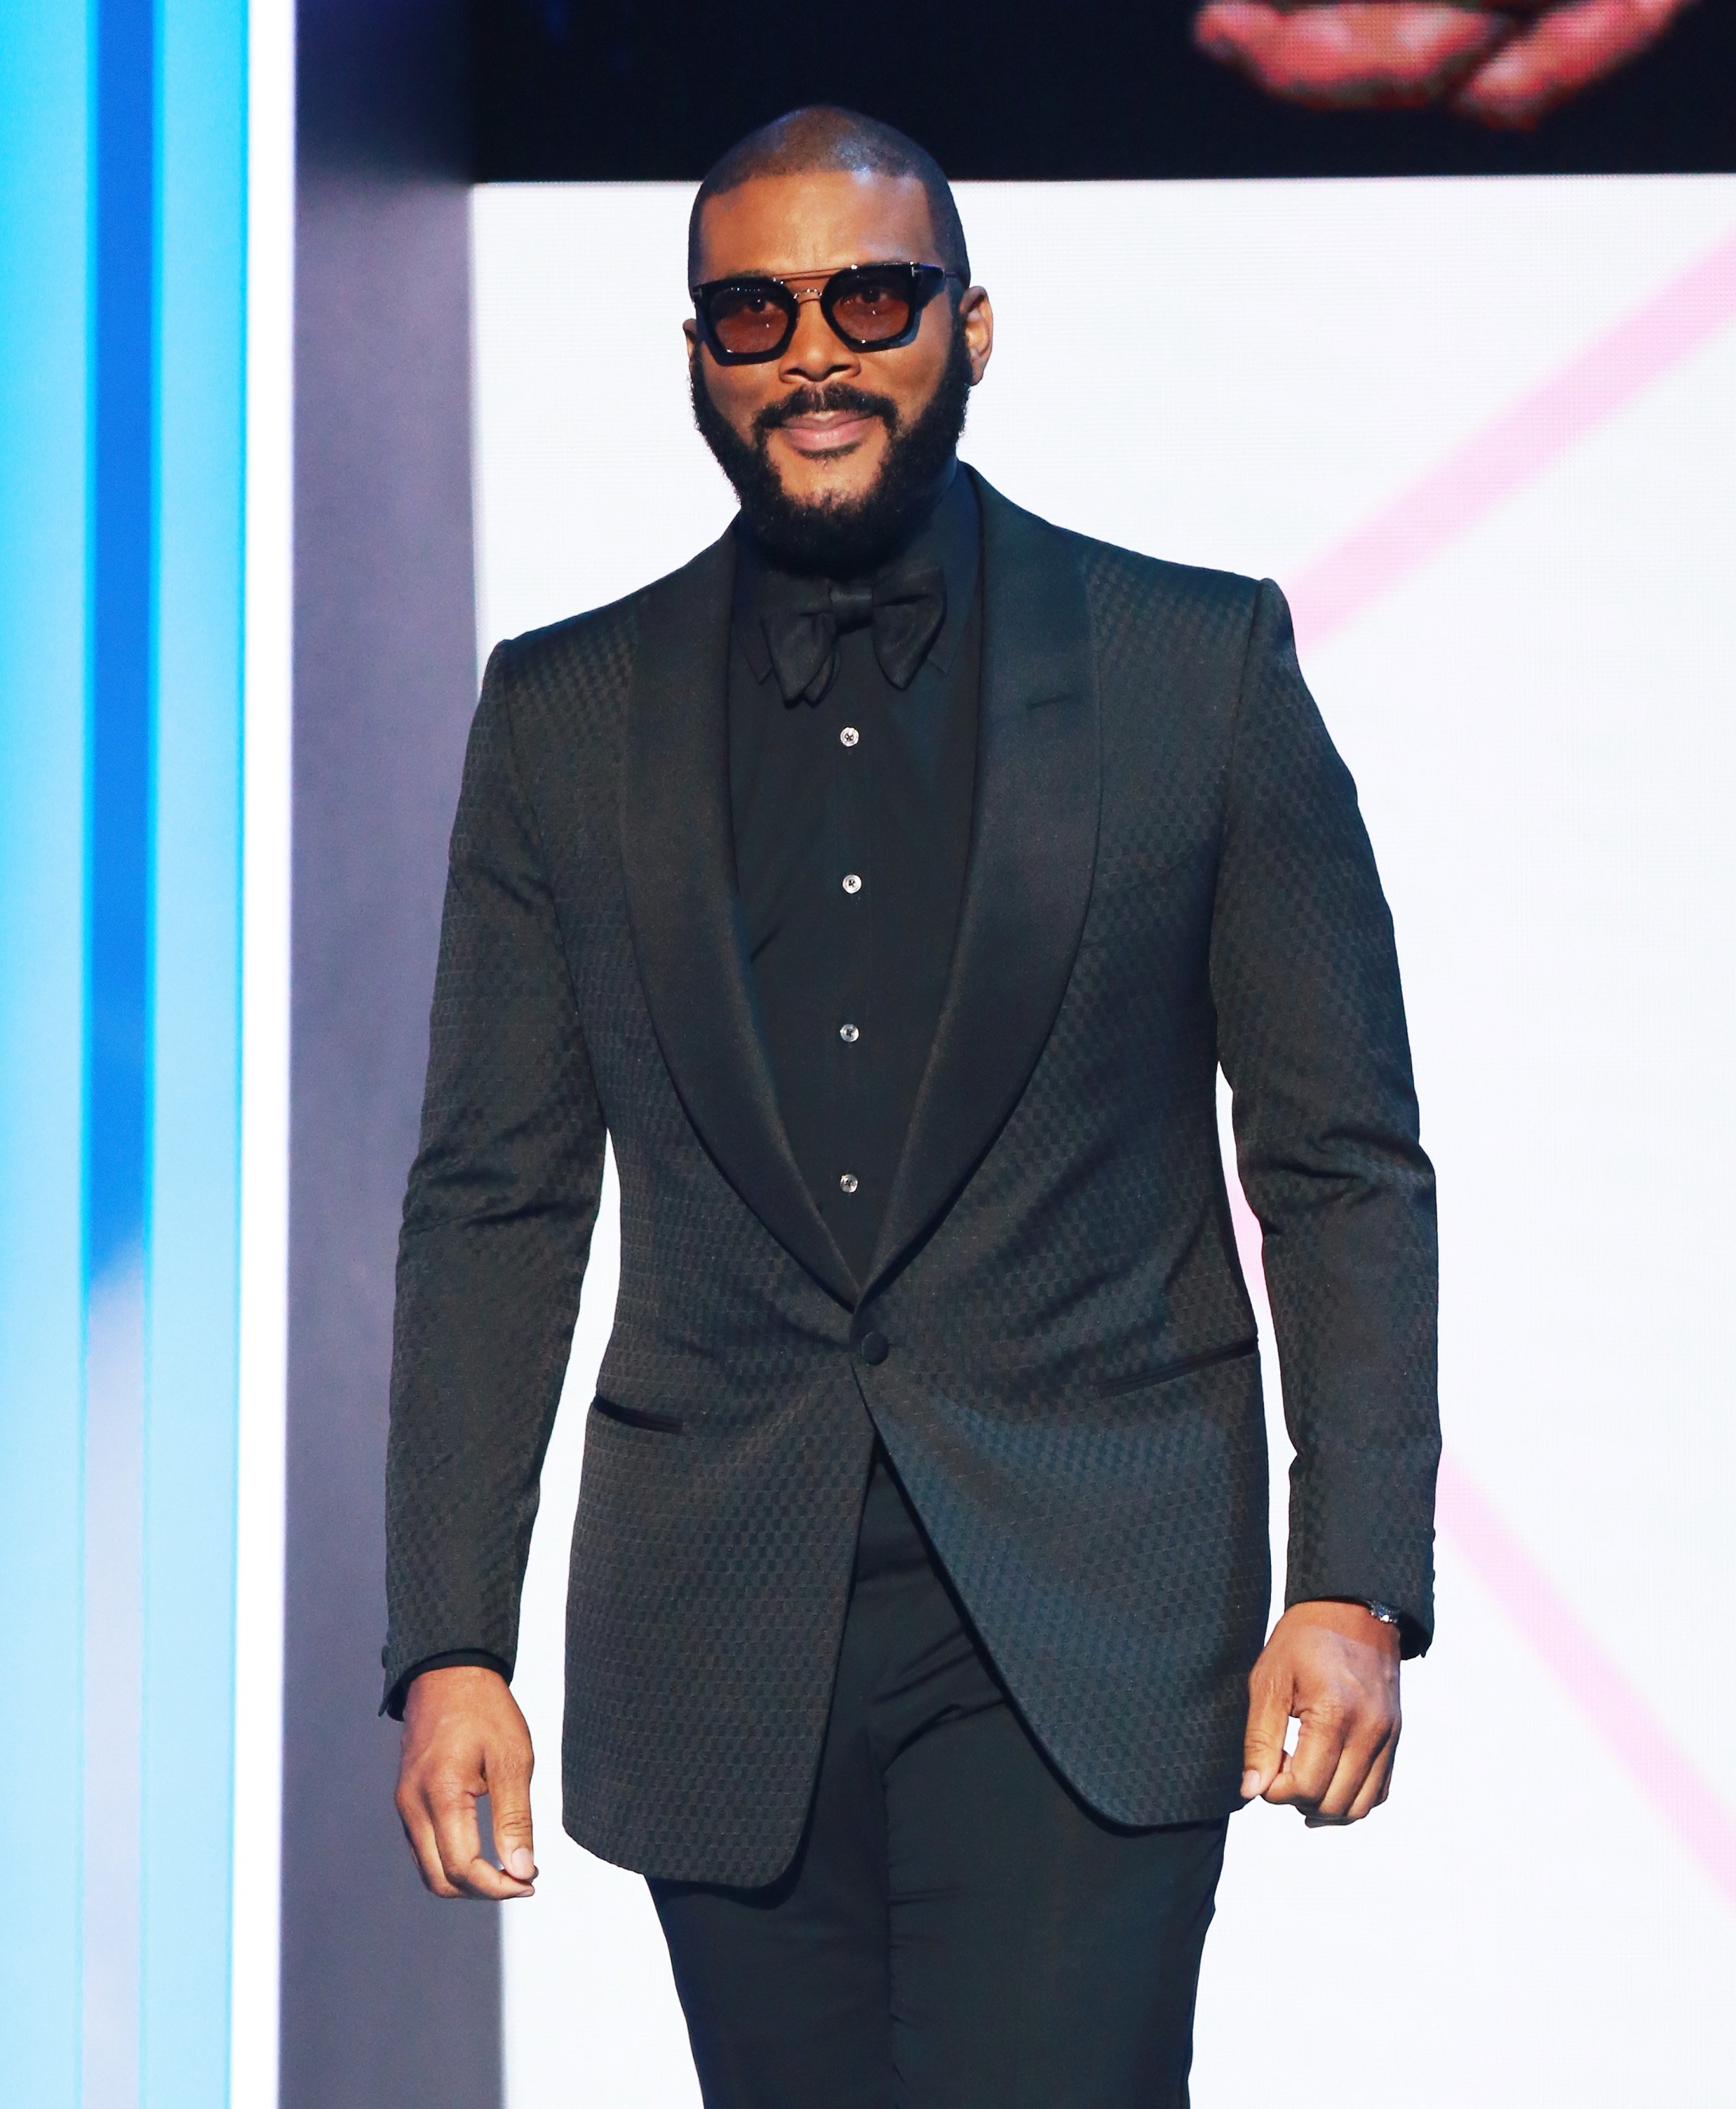 Tyler Perry speaks onstage at the 2018 BET Awards on June 24, 2018 in Los Angeles, California | Photo: Getty Images